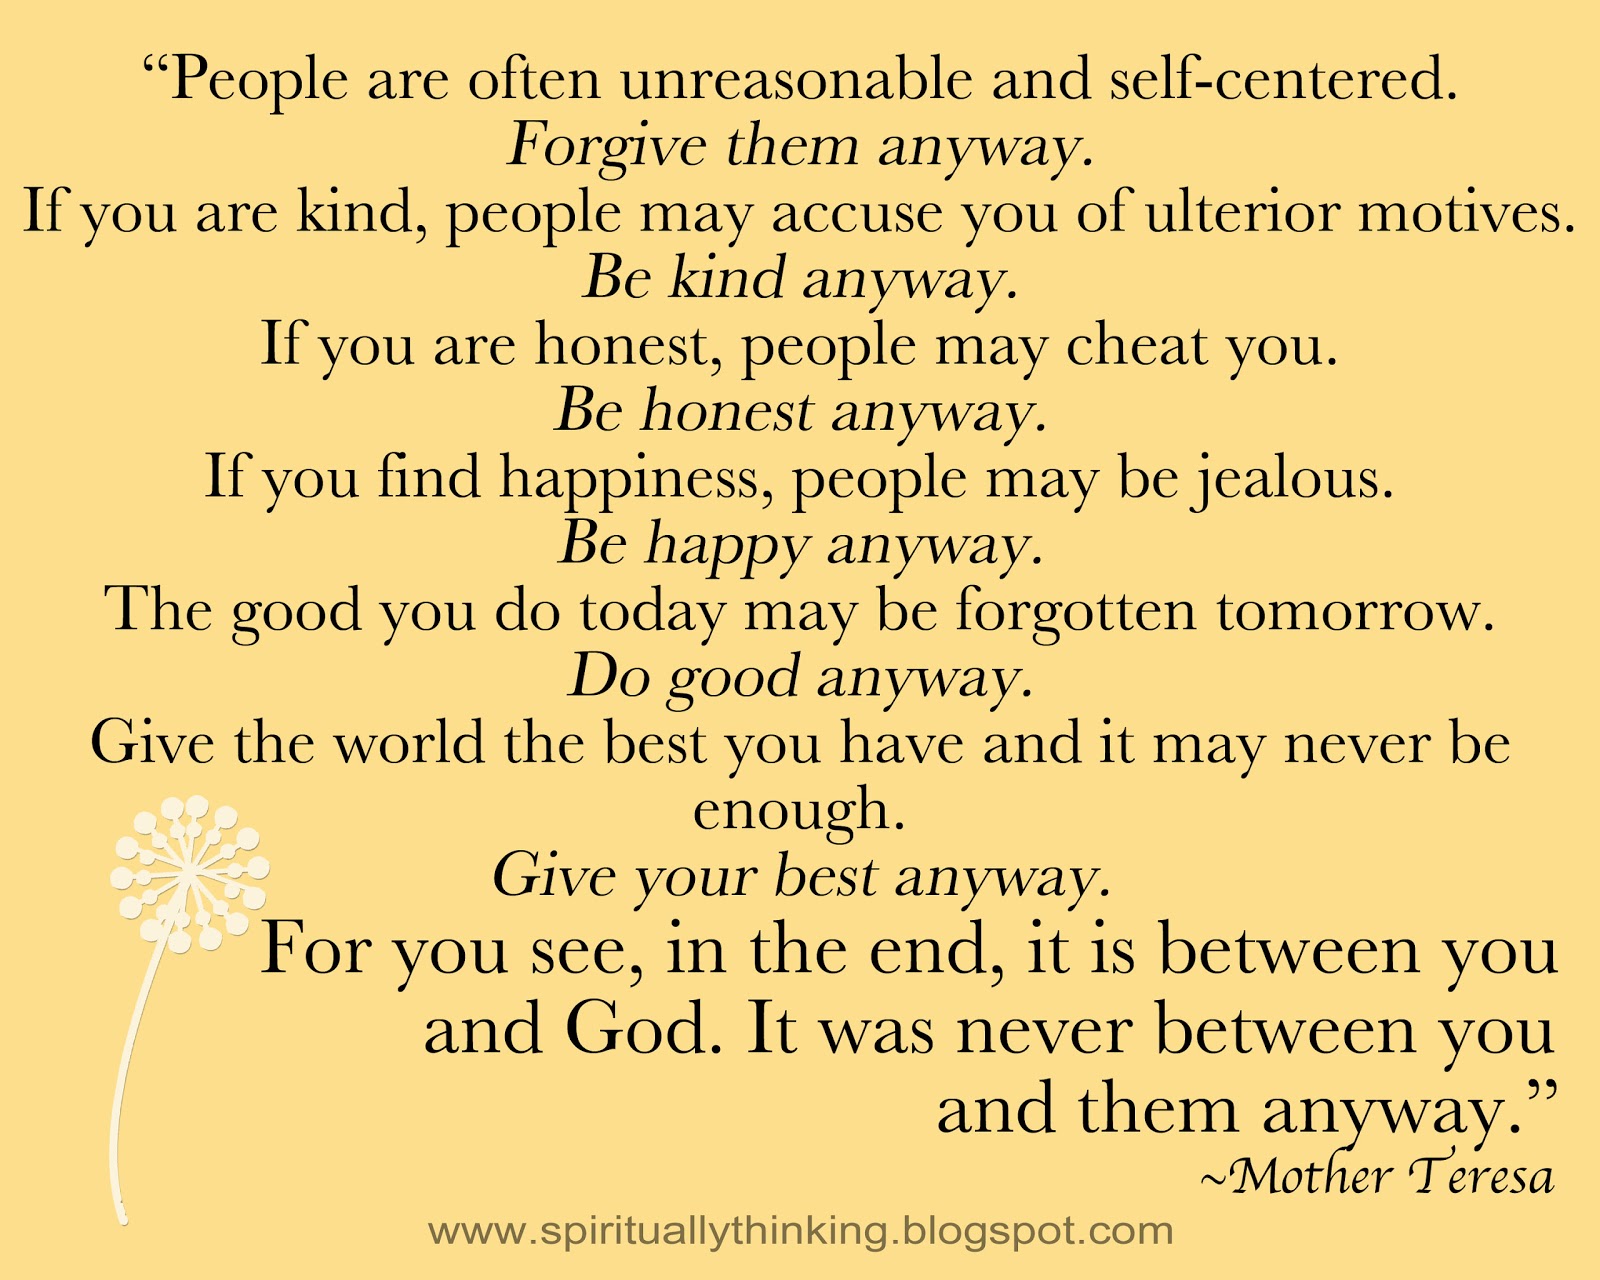 Do It Any Way By Mother Teresa Quotes. QuotesGram